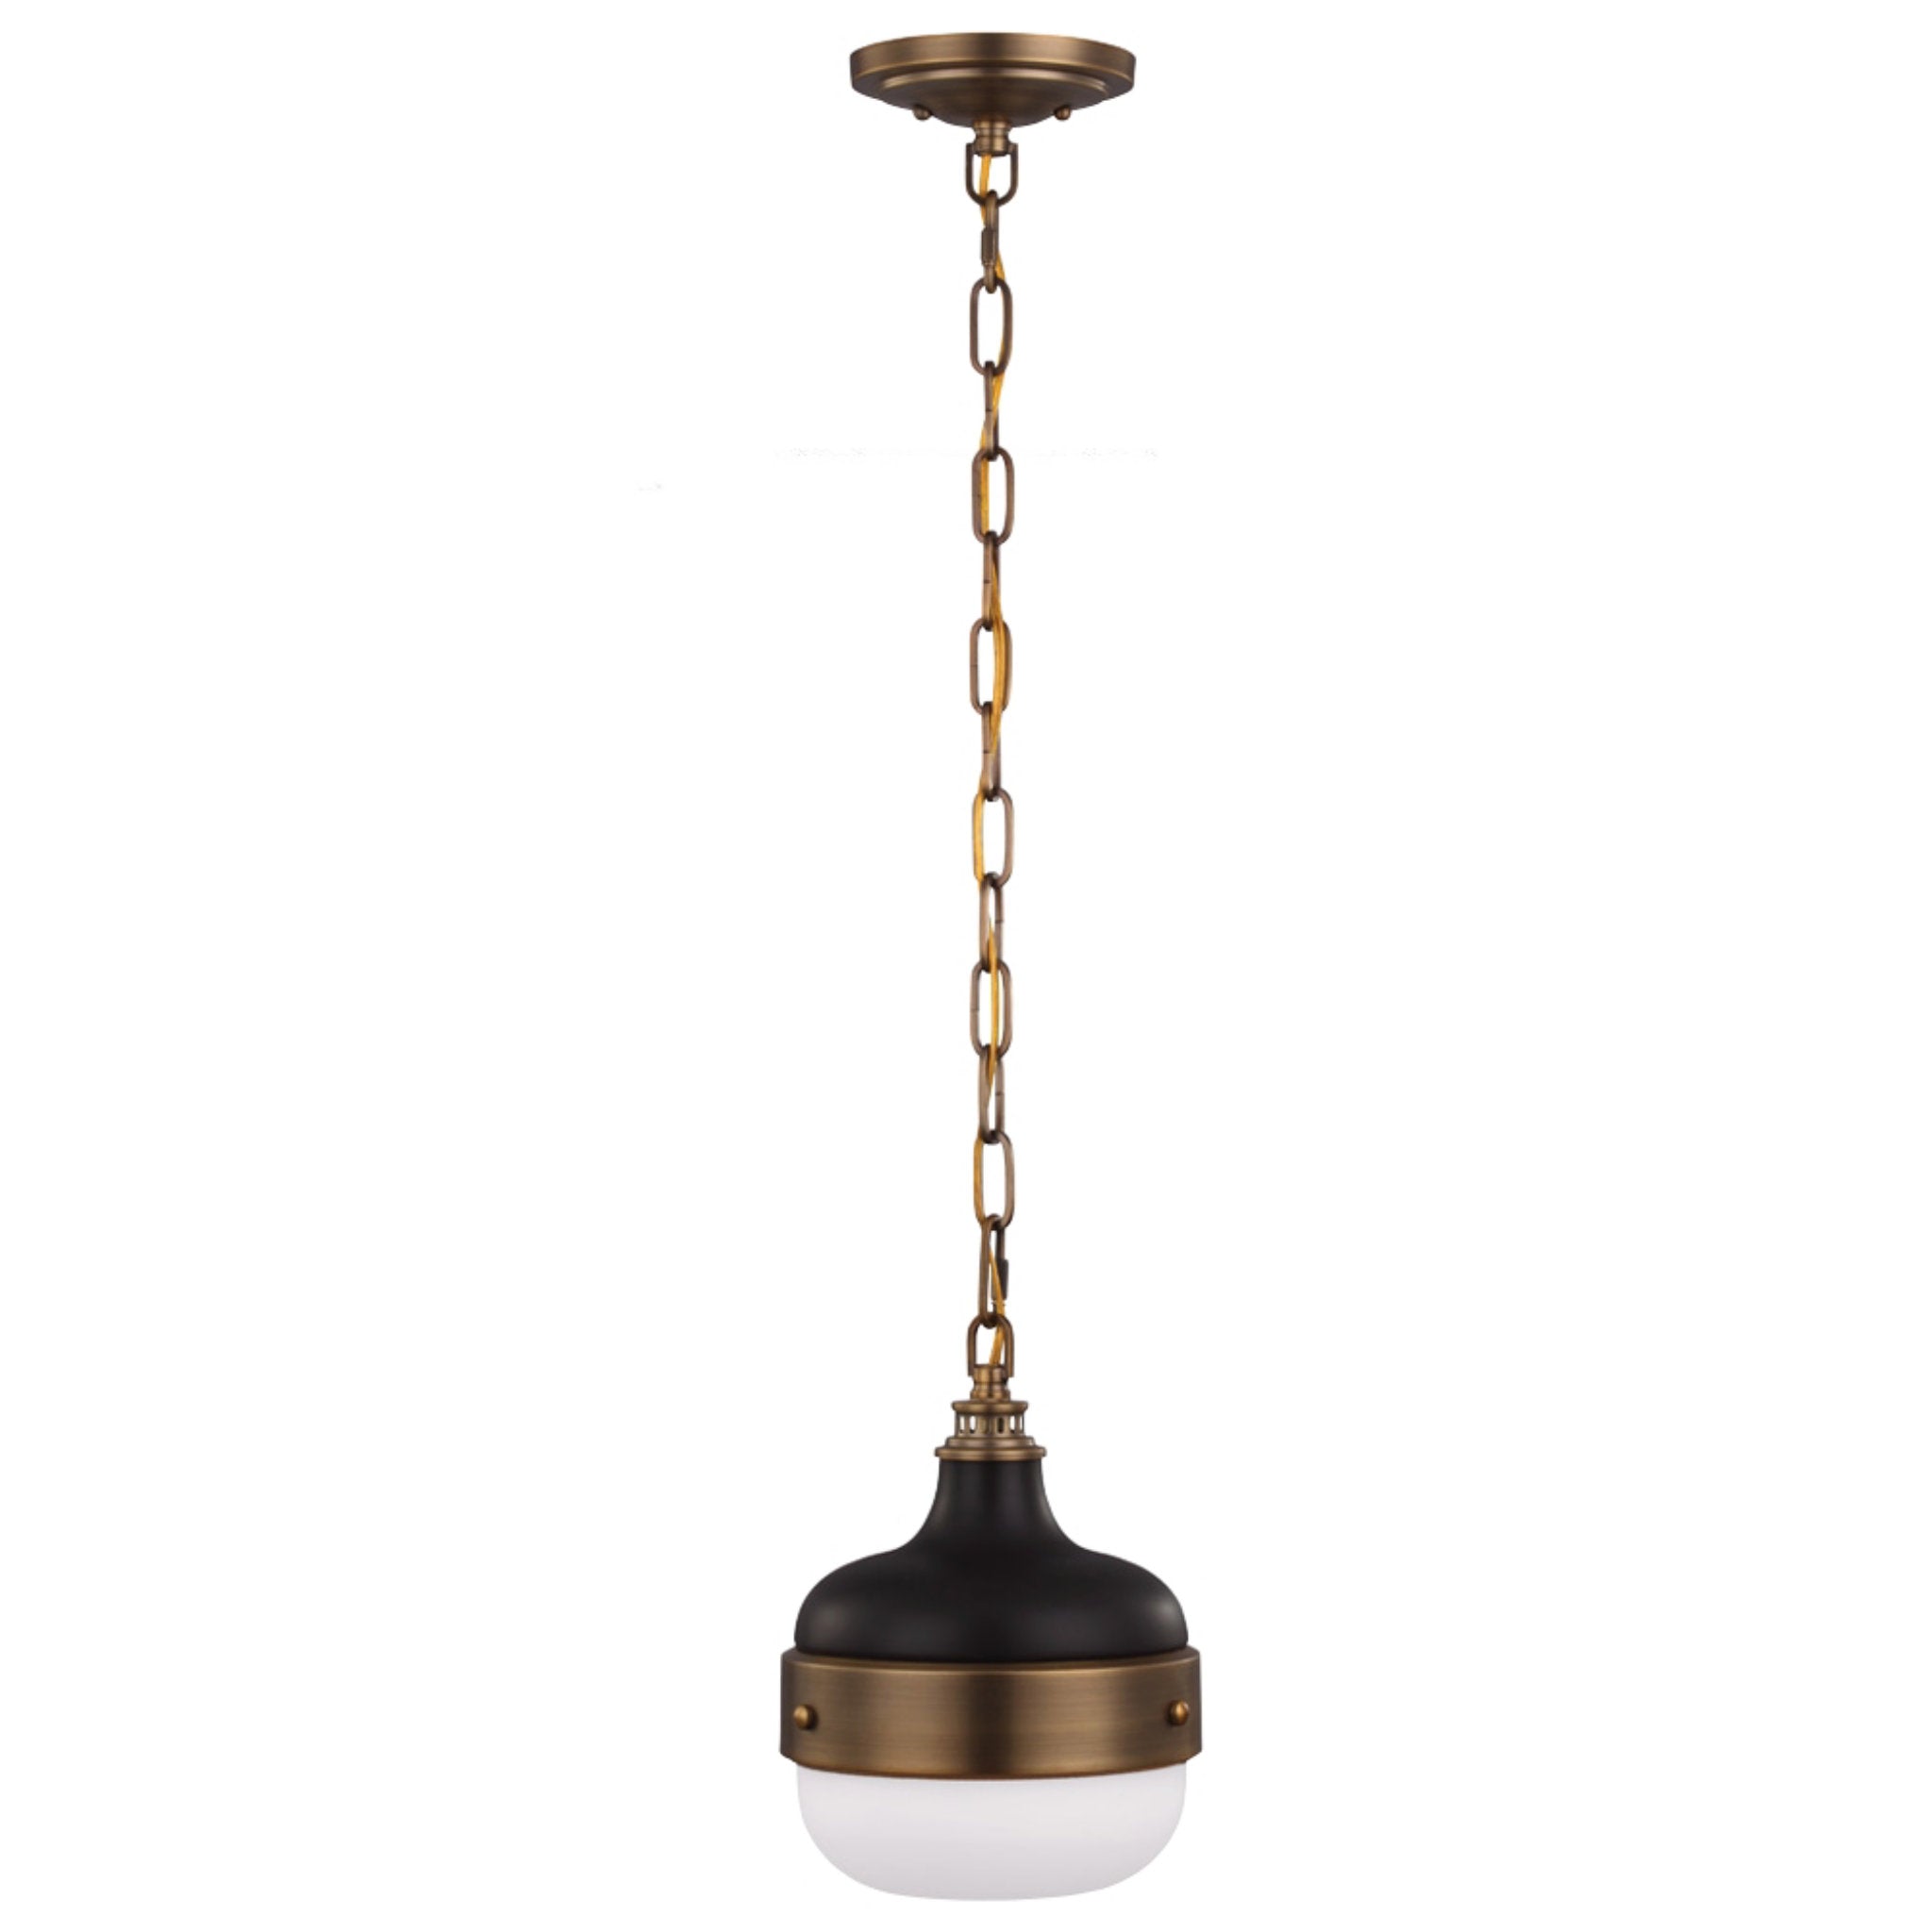 Cadence Mini Pendant Period Inspired Dark Sky 10.875" Height Steel Round White Opal Etched Shade in Antique Brass / Matte Black